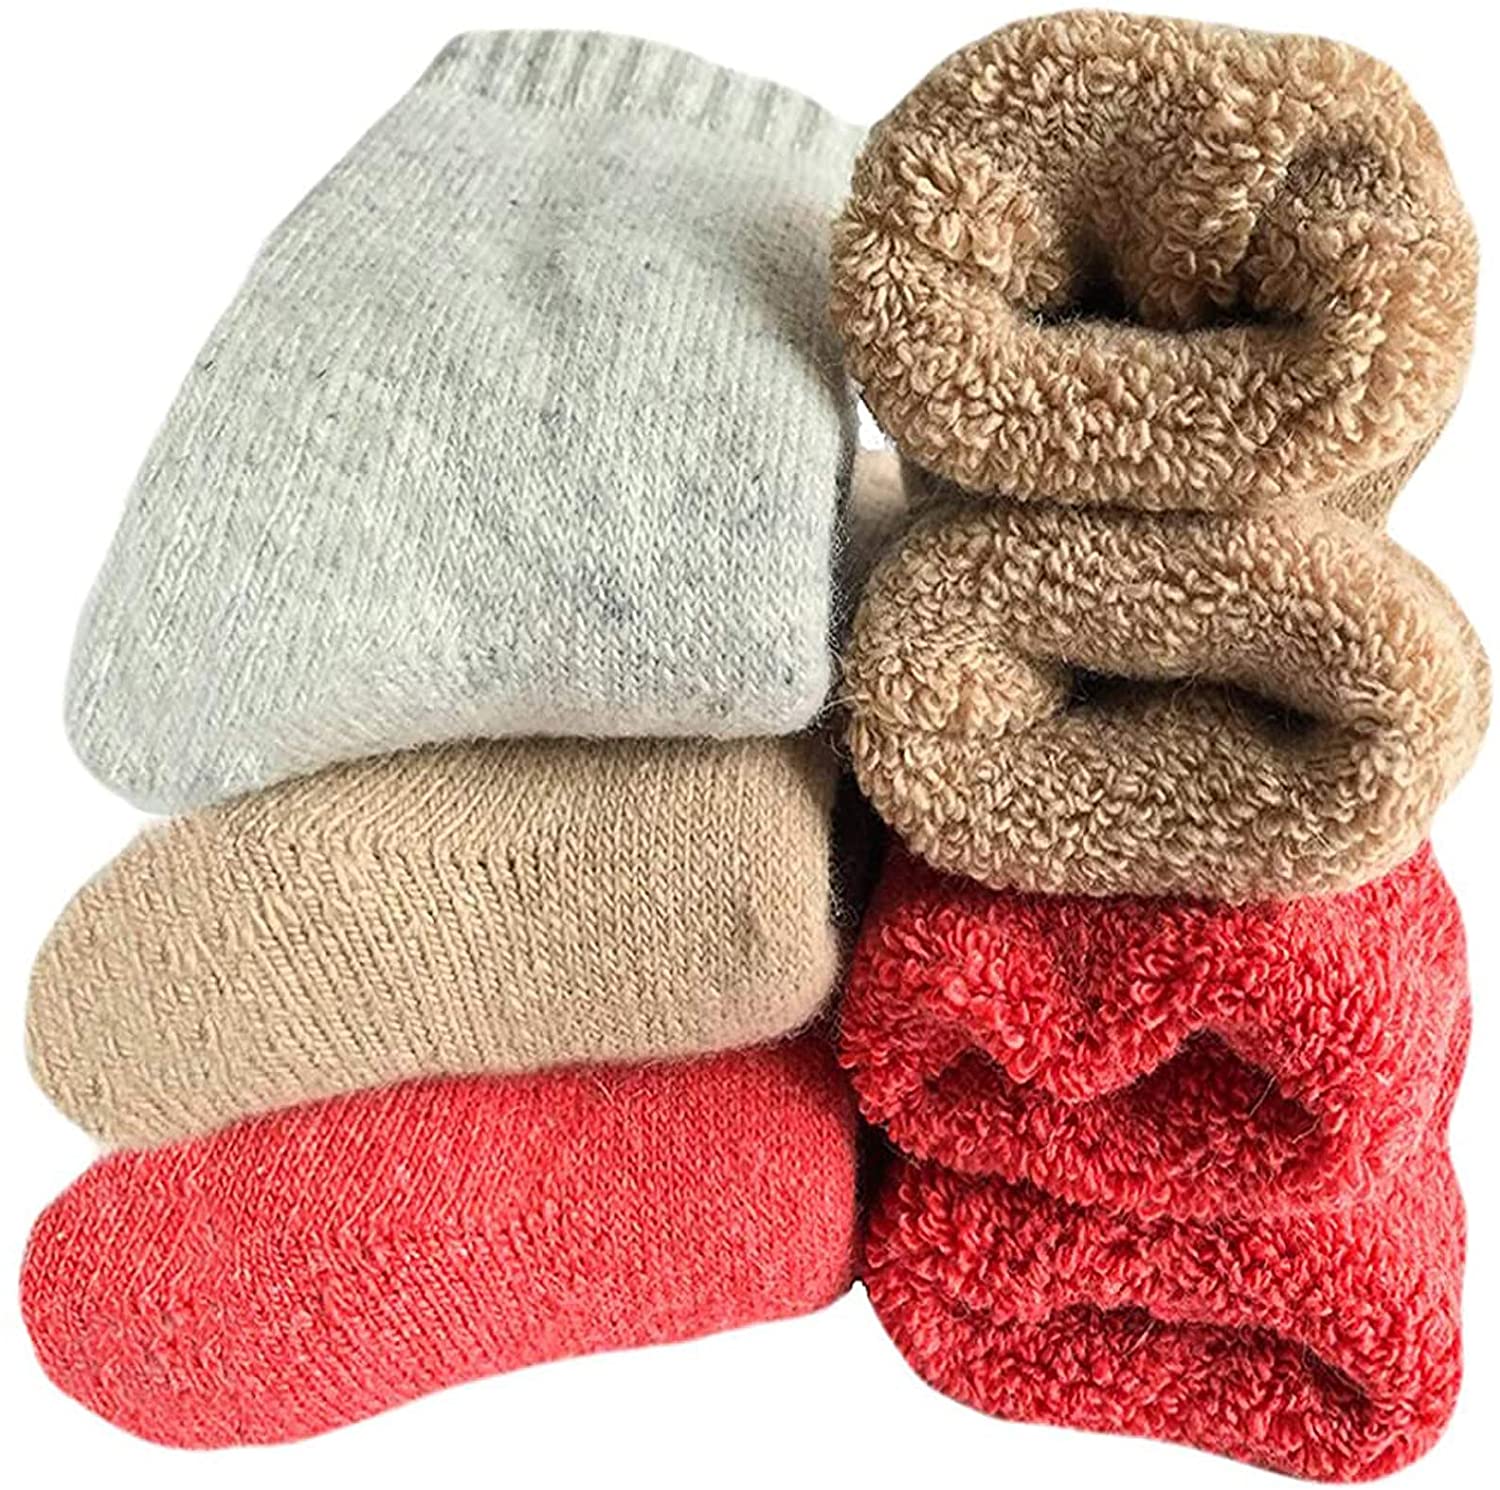 Toes clumsy engineering Womens Super Thick Wool Socks - Soft Warm Comfort Casual Crew Winter Socks  (Pack | eBay